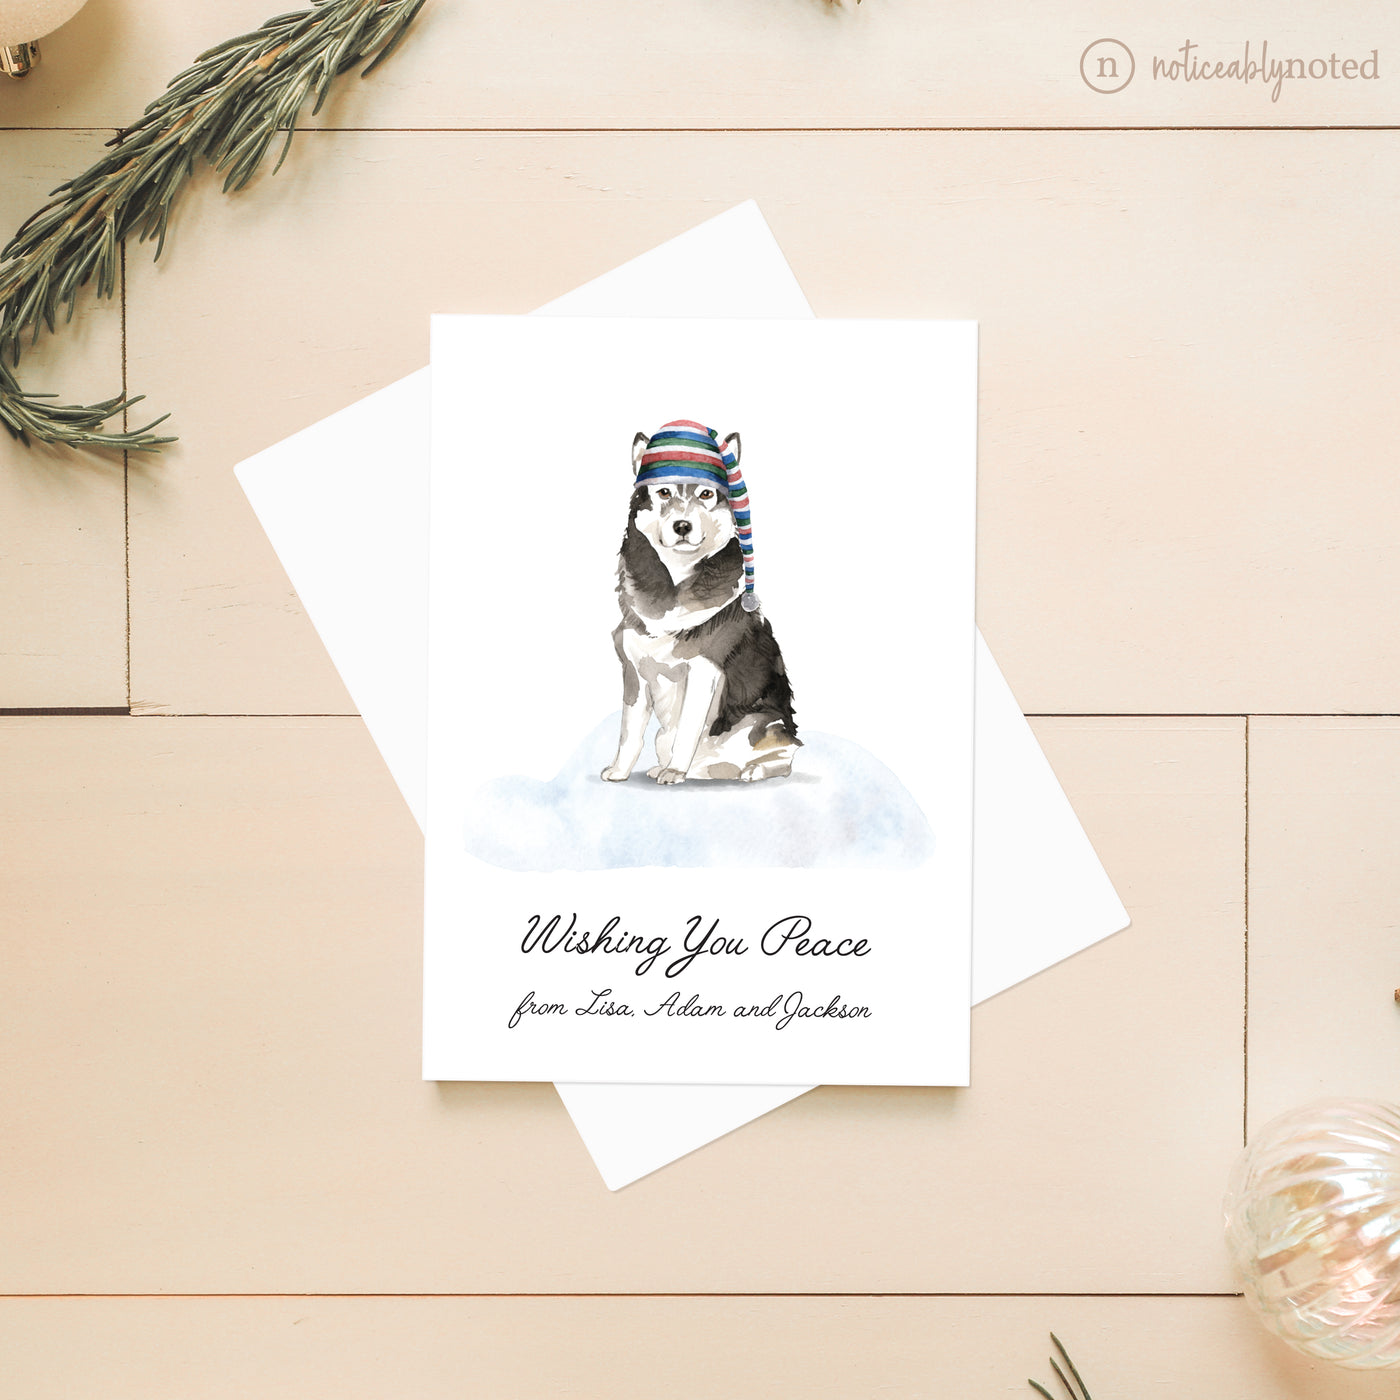 Malamute Dog Christmas Cards | Noticeably Noted